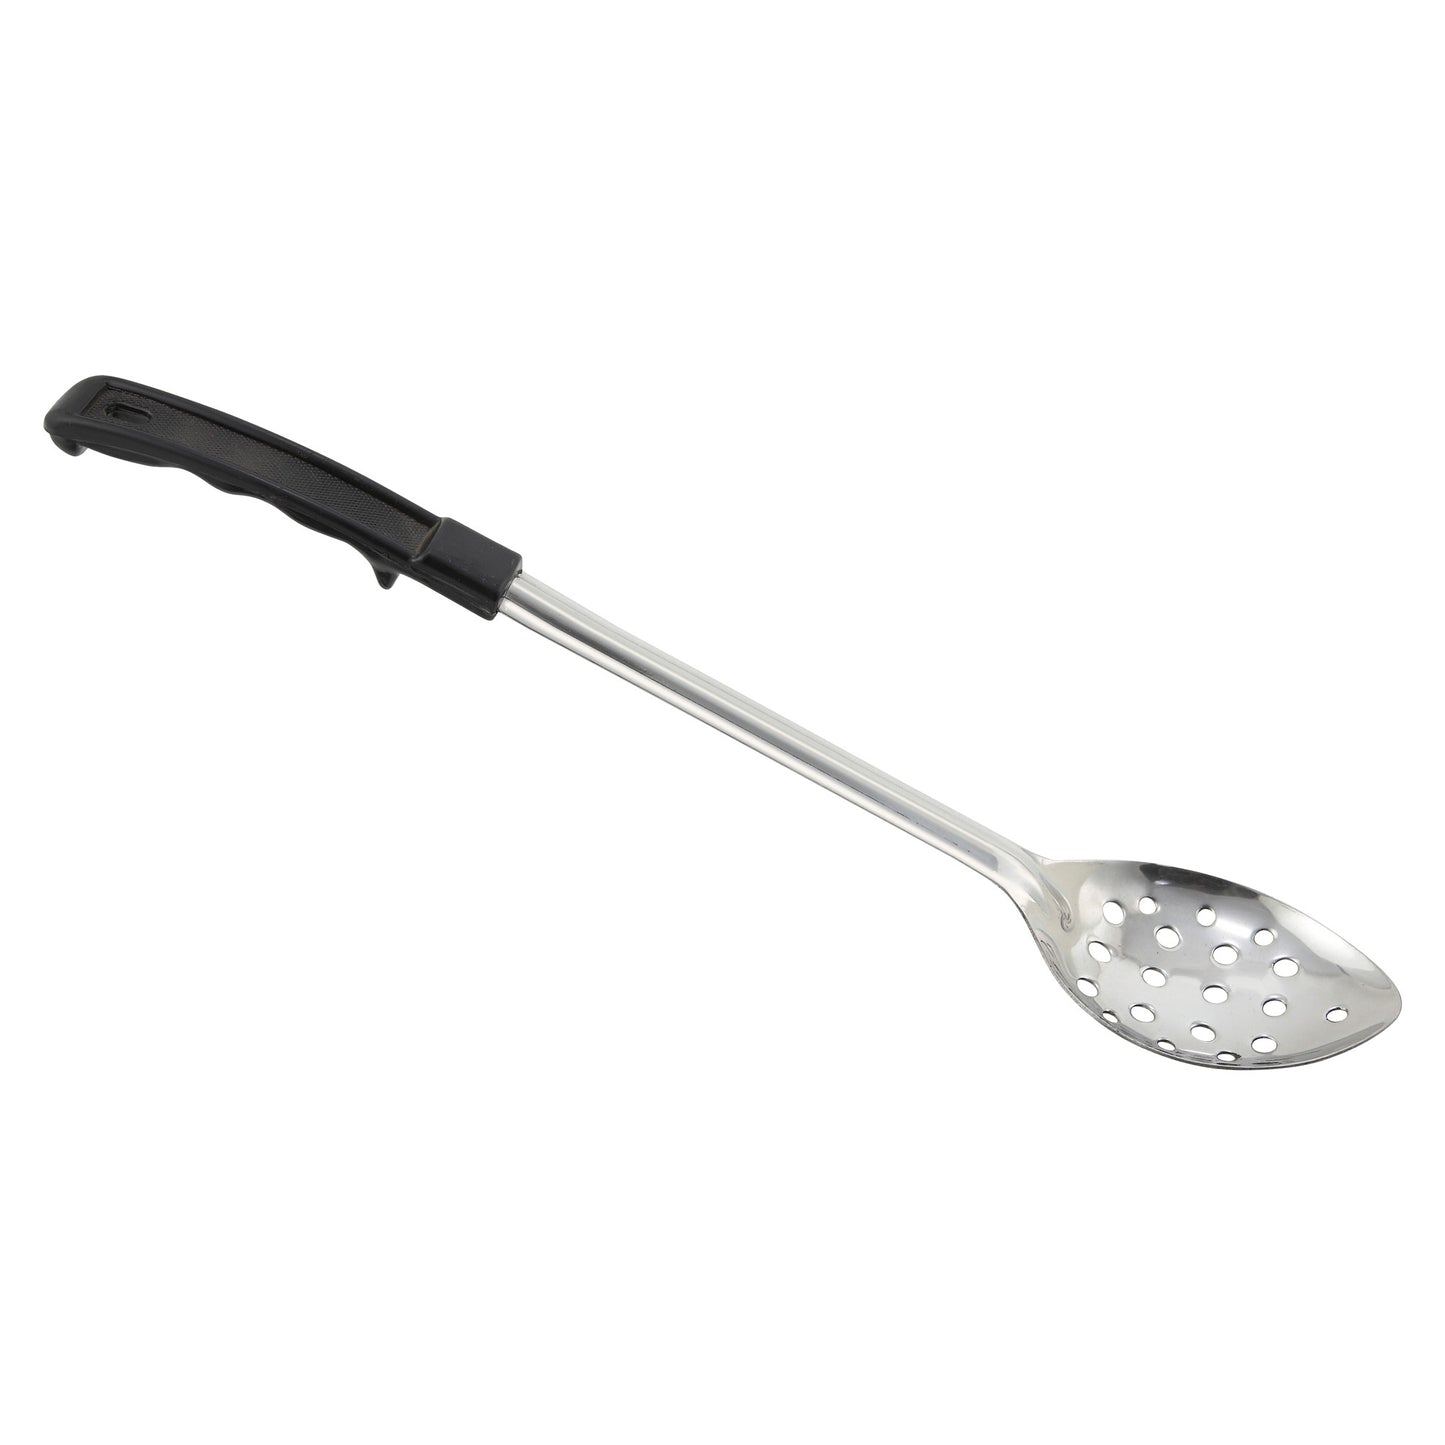 BHPN-15 - Winco Prime Basting Spoon with Stop-Hook ABS Handle - Perforated, 15"